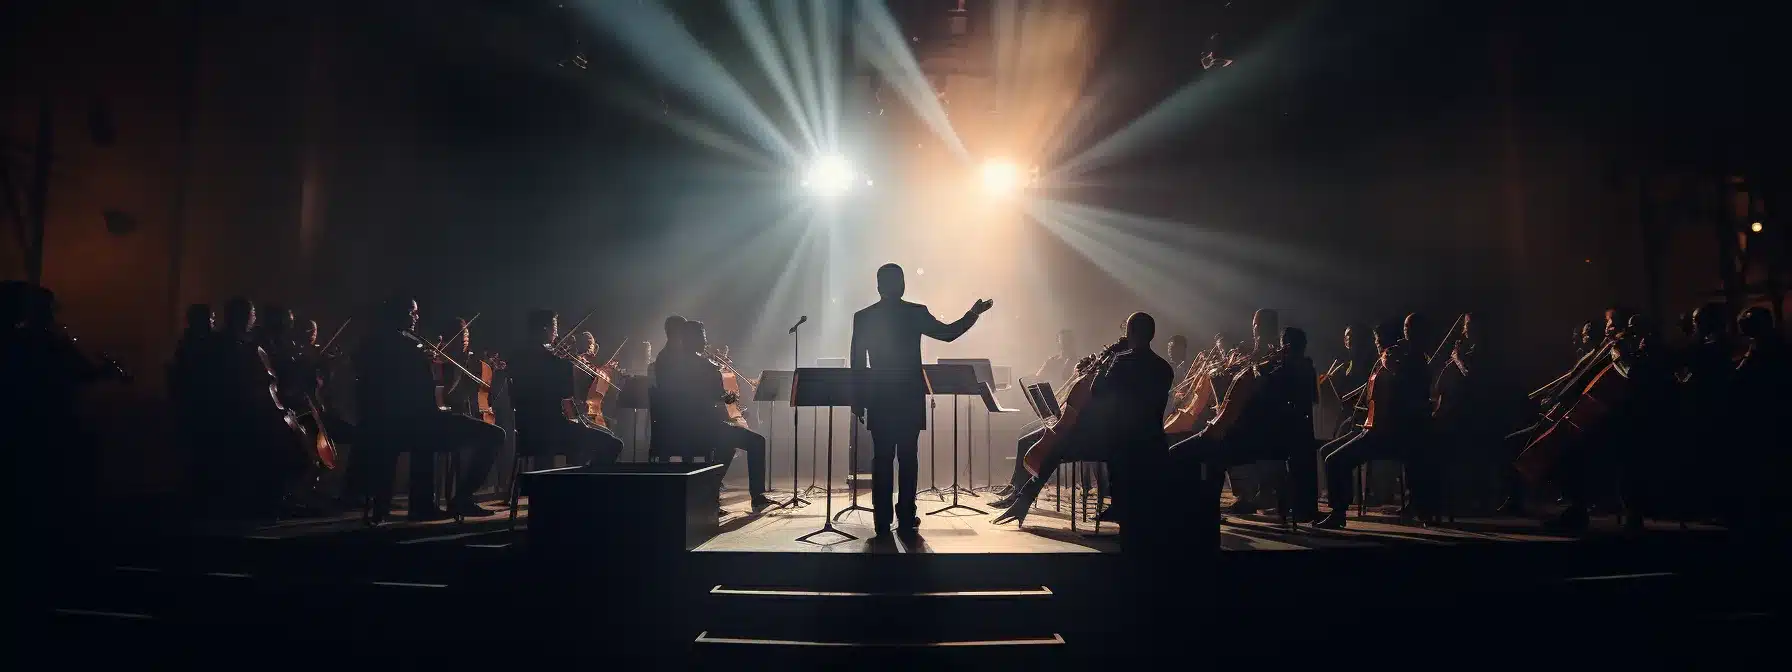 A Conductor Stands Before A Bustling Orchestra, Guiding Each Instrument As They Play In Harmony To Create A Melodious Symphony.